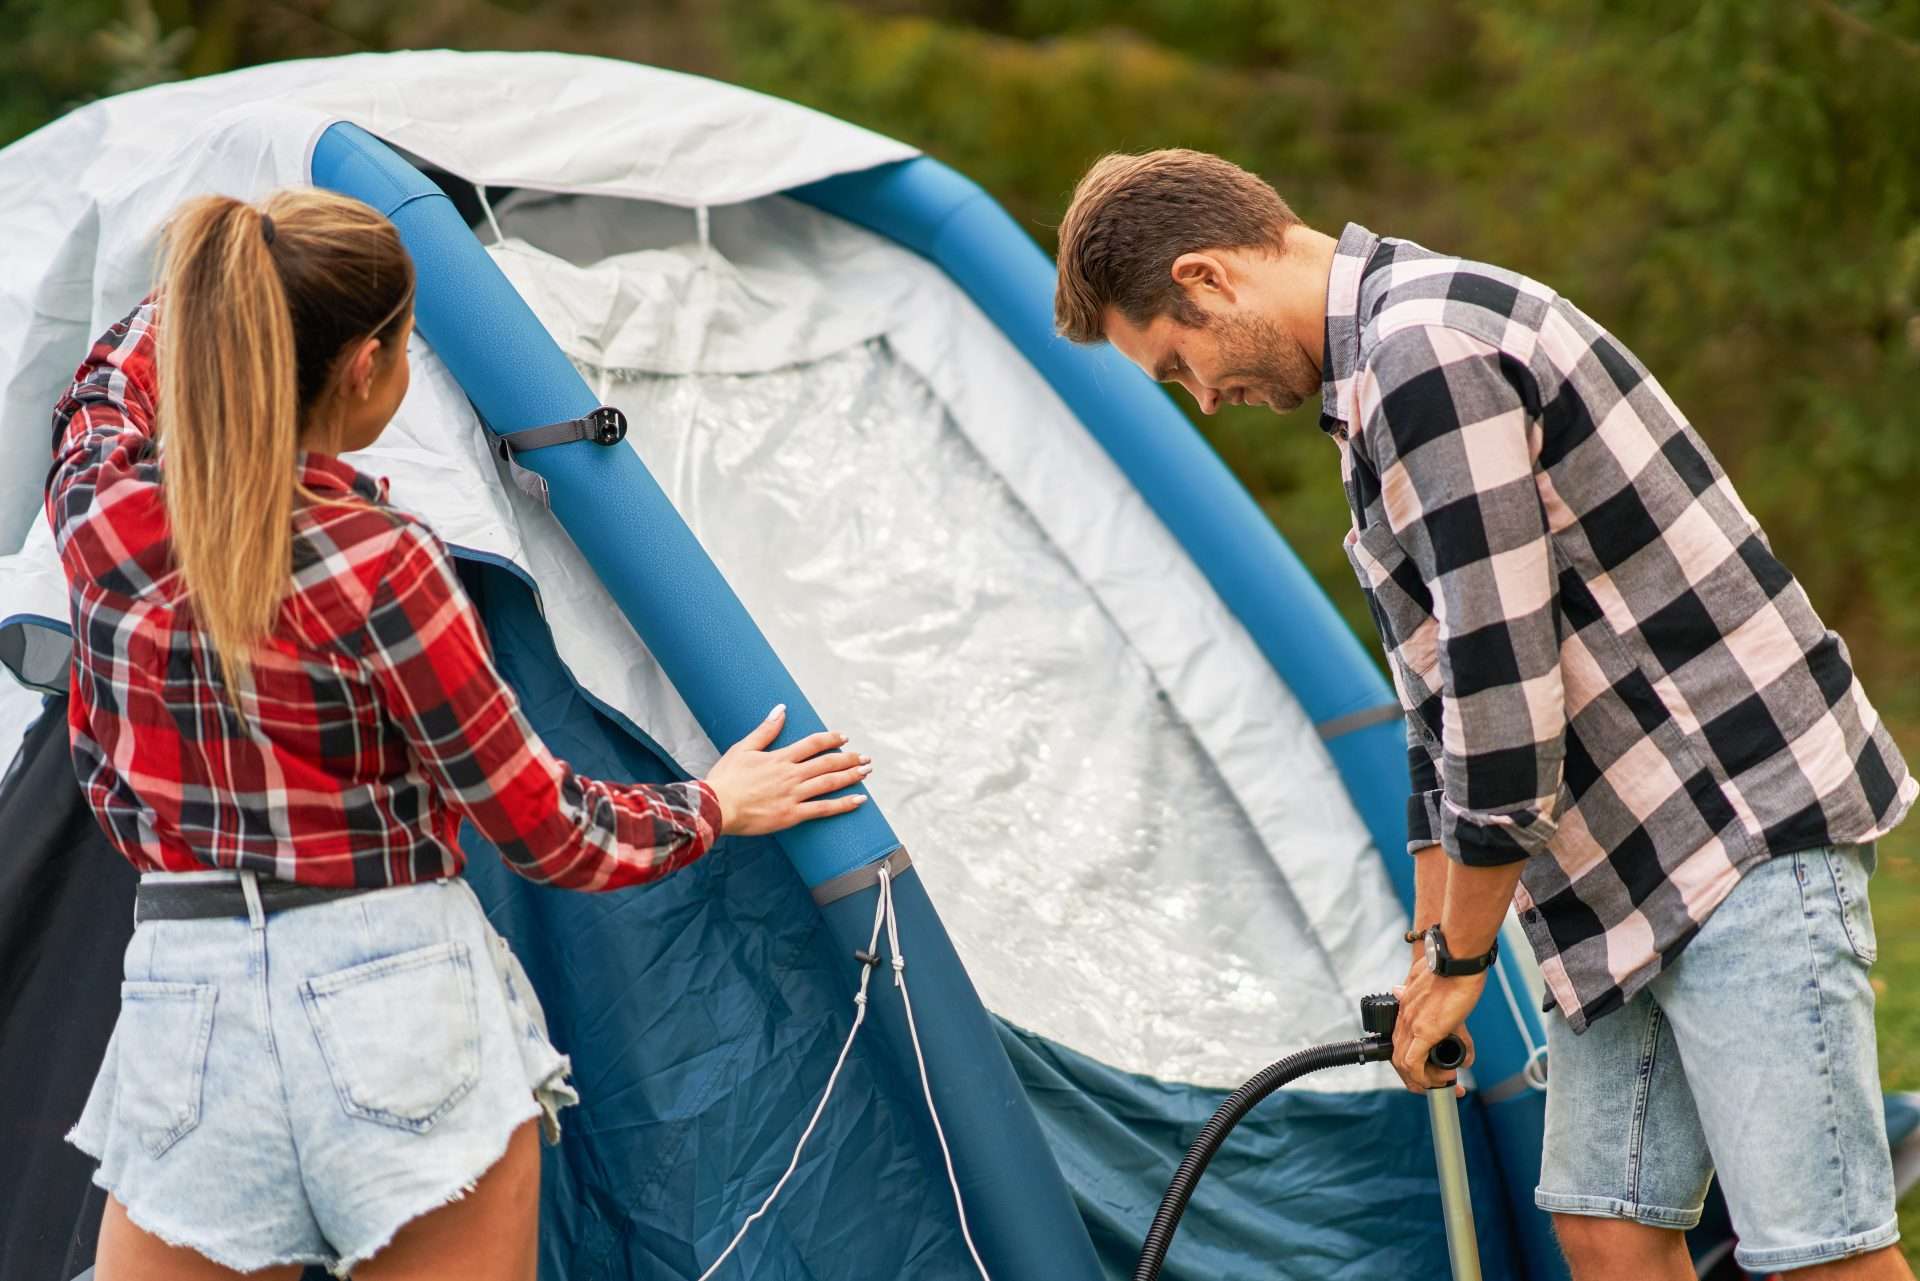 Couple building solar power tent together